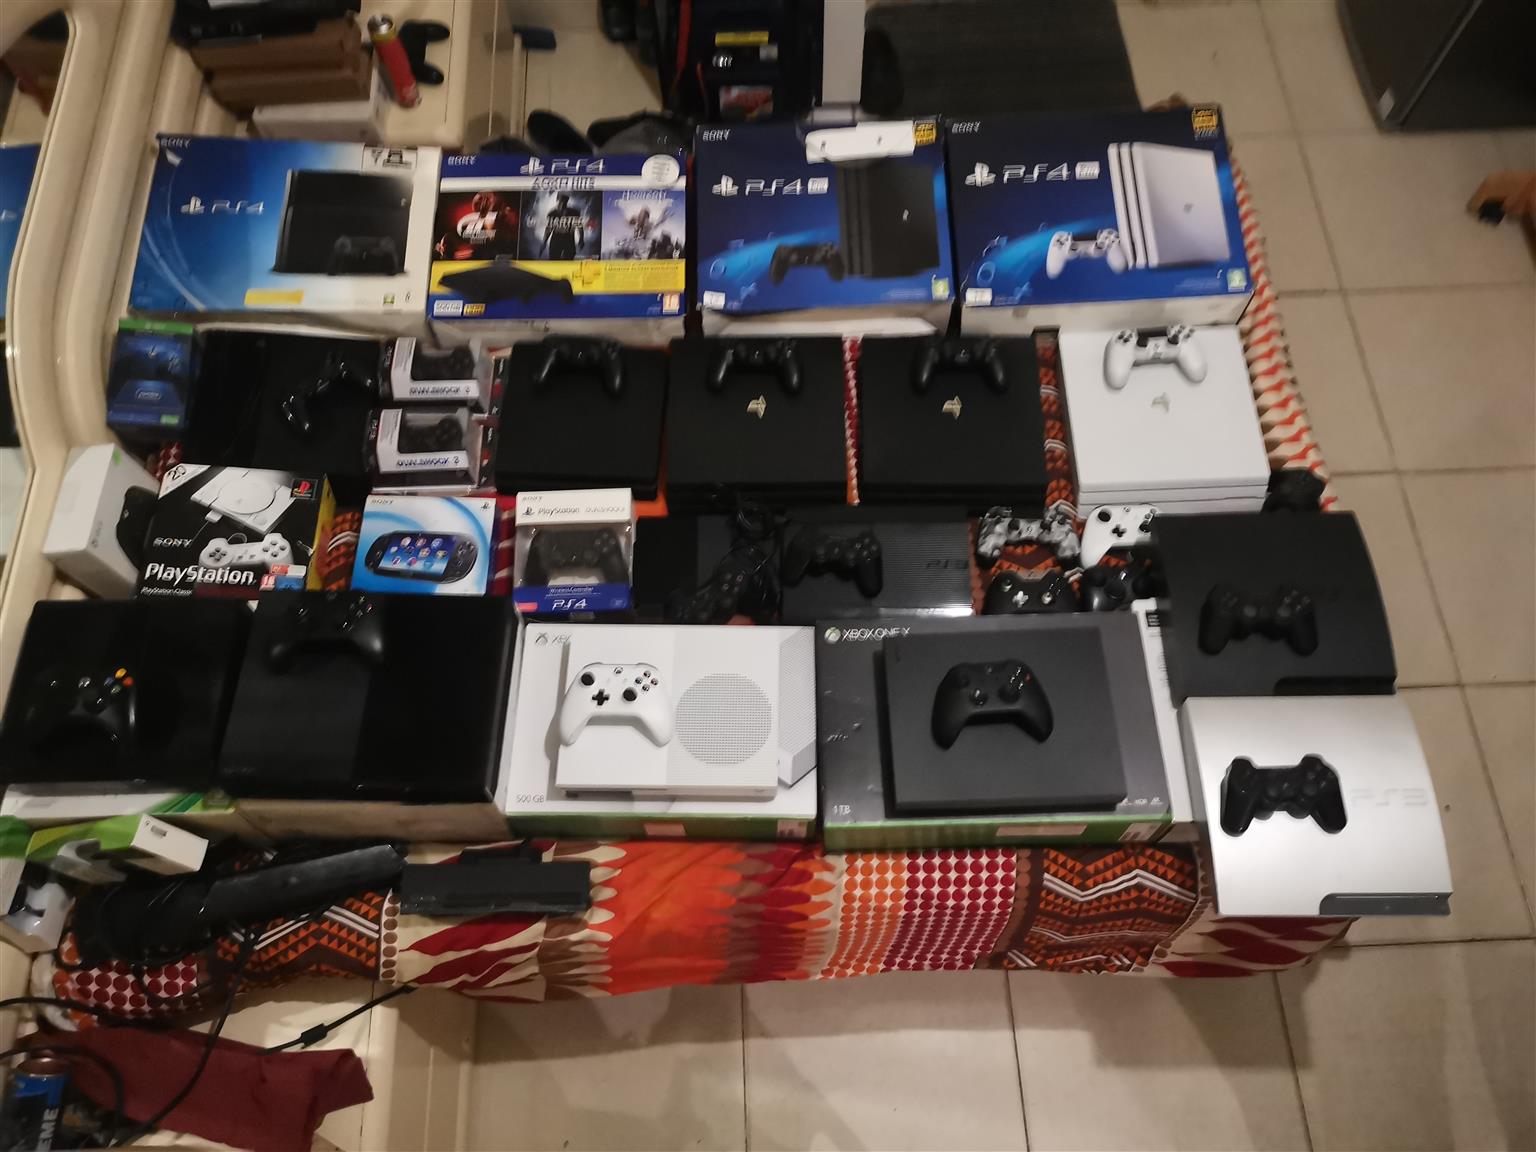 All Gaming Consoles JHB 2022 Pricelist 1. Ps4 R4500 2. Ps4 slim R4999 3. Ps4 pro